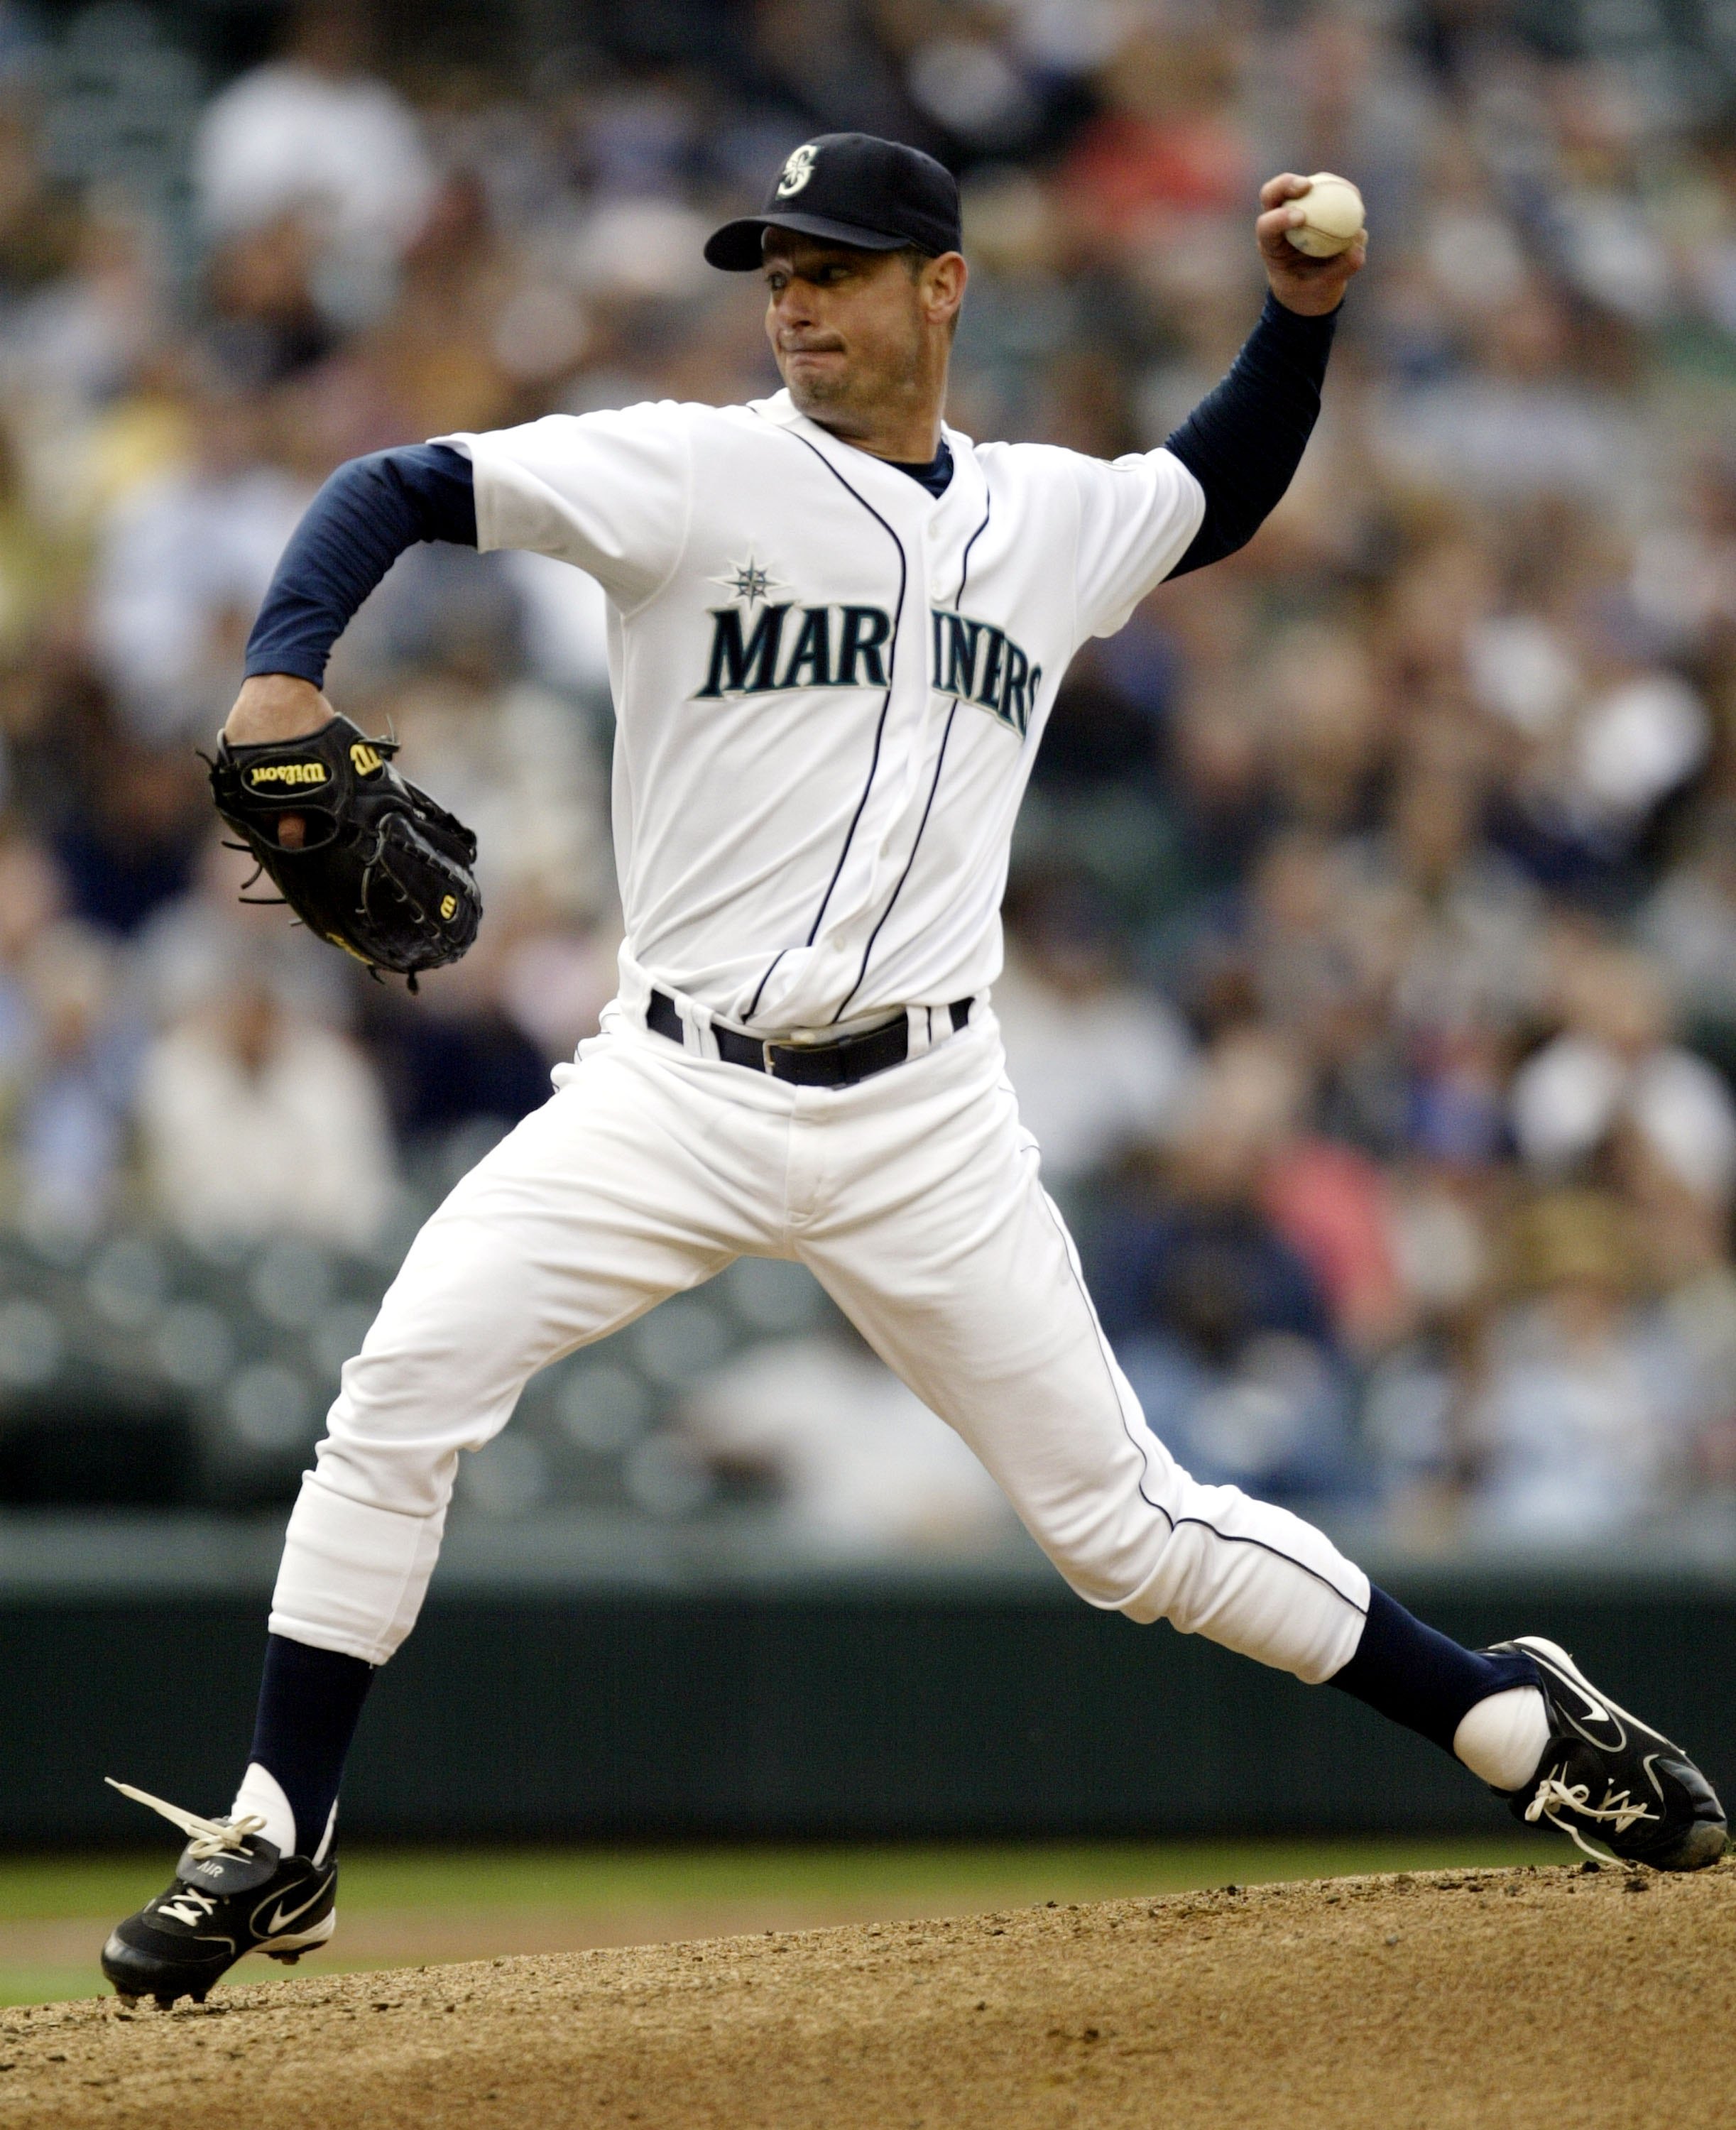 SEATTLE - JULY 5:  Starting pitcher Jamie Moyer #50 of the Seattle Mariners throws against the Los Angeles Angels of Anaheim on July 5, 2006 at Safeco Field in Seattle, Washington.  (Photo by Otto Greule Jr/Getty Images)